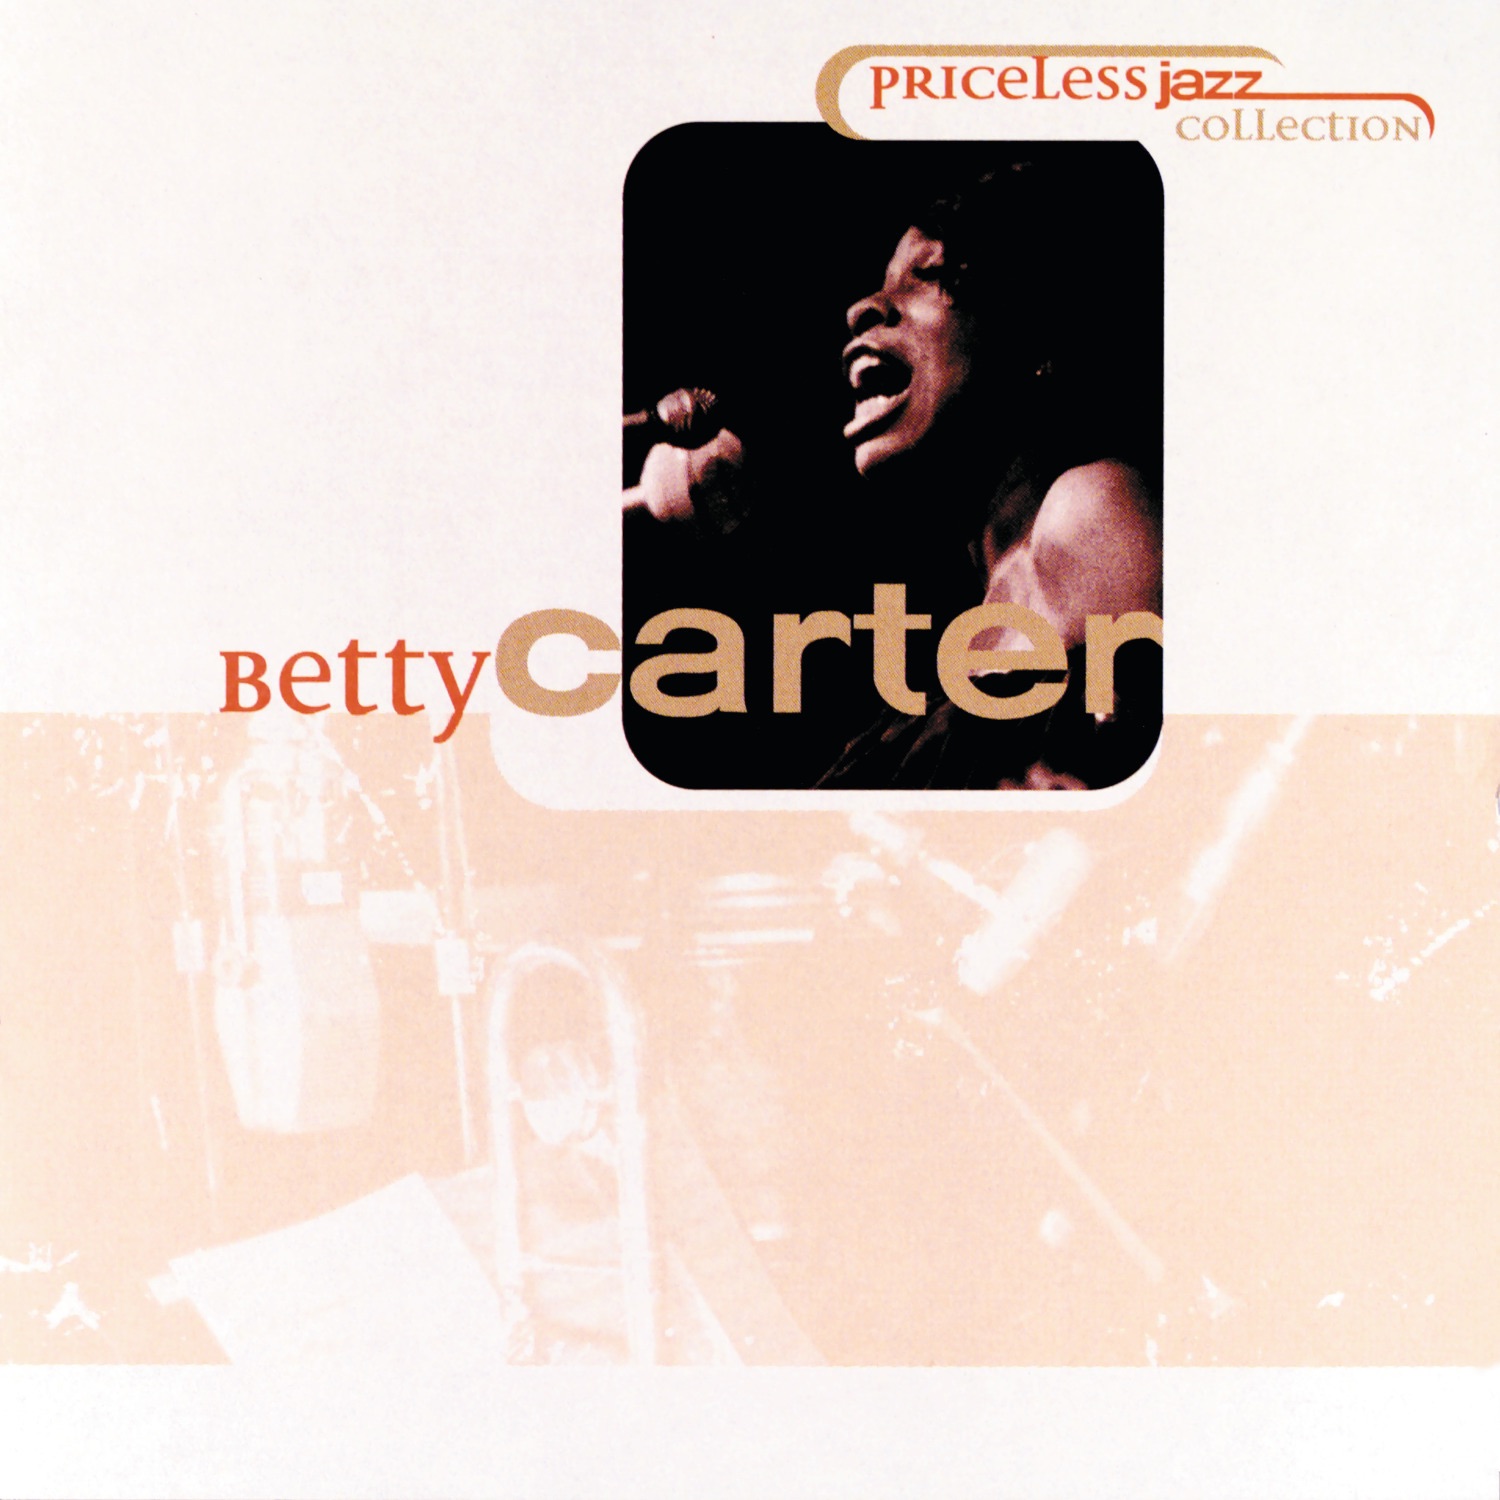 Art for Jazz (Ain't Nothin' But Soul) by Betty Carter & Richard Wess